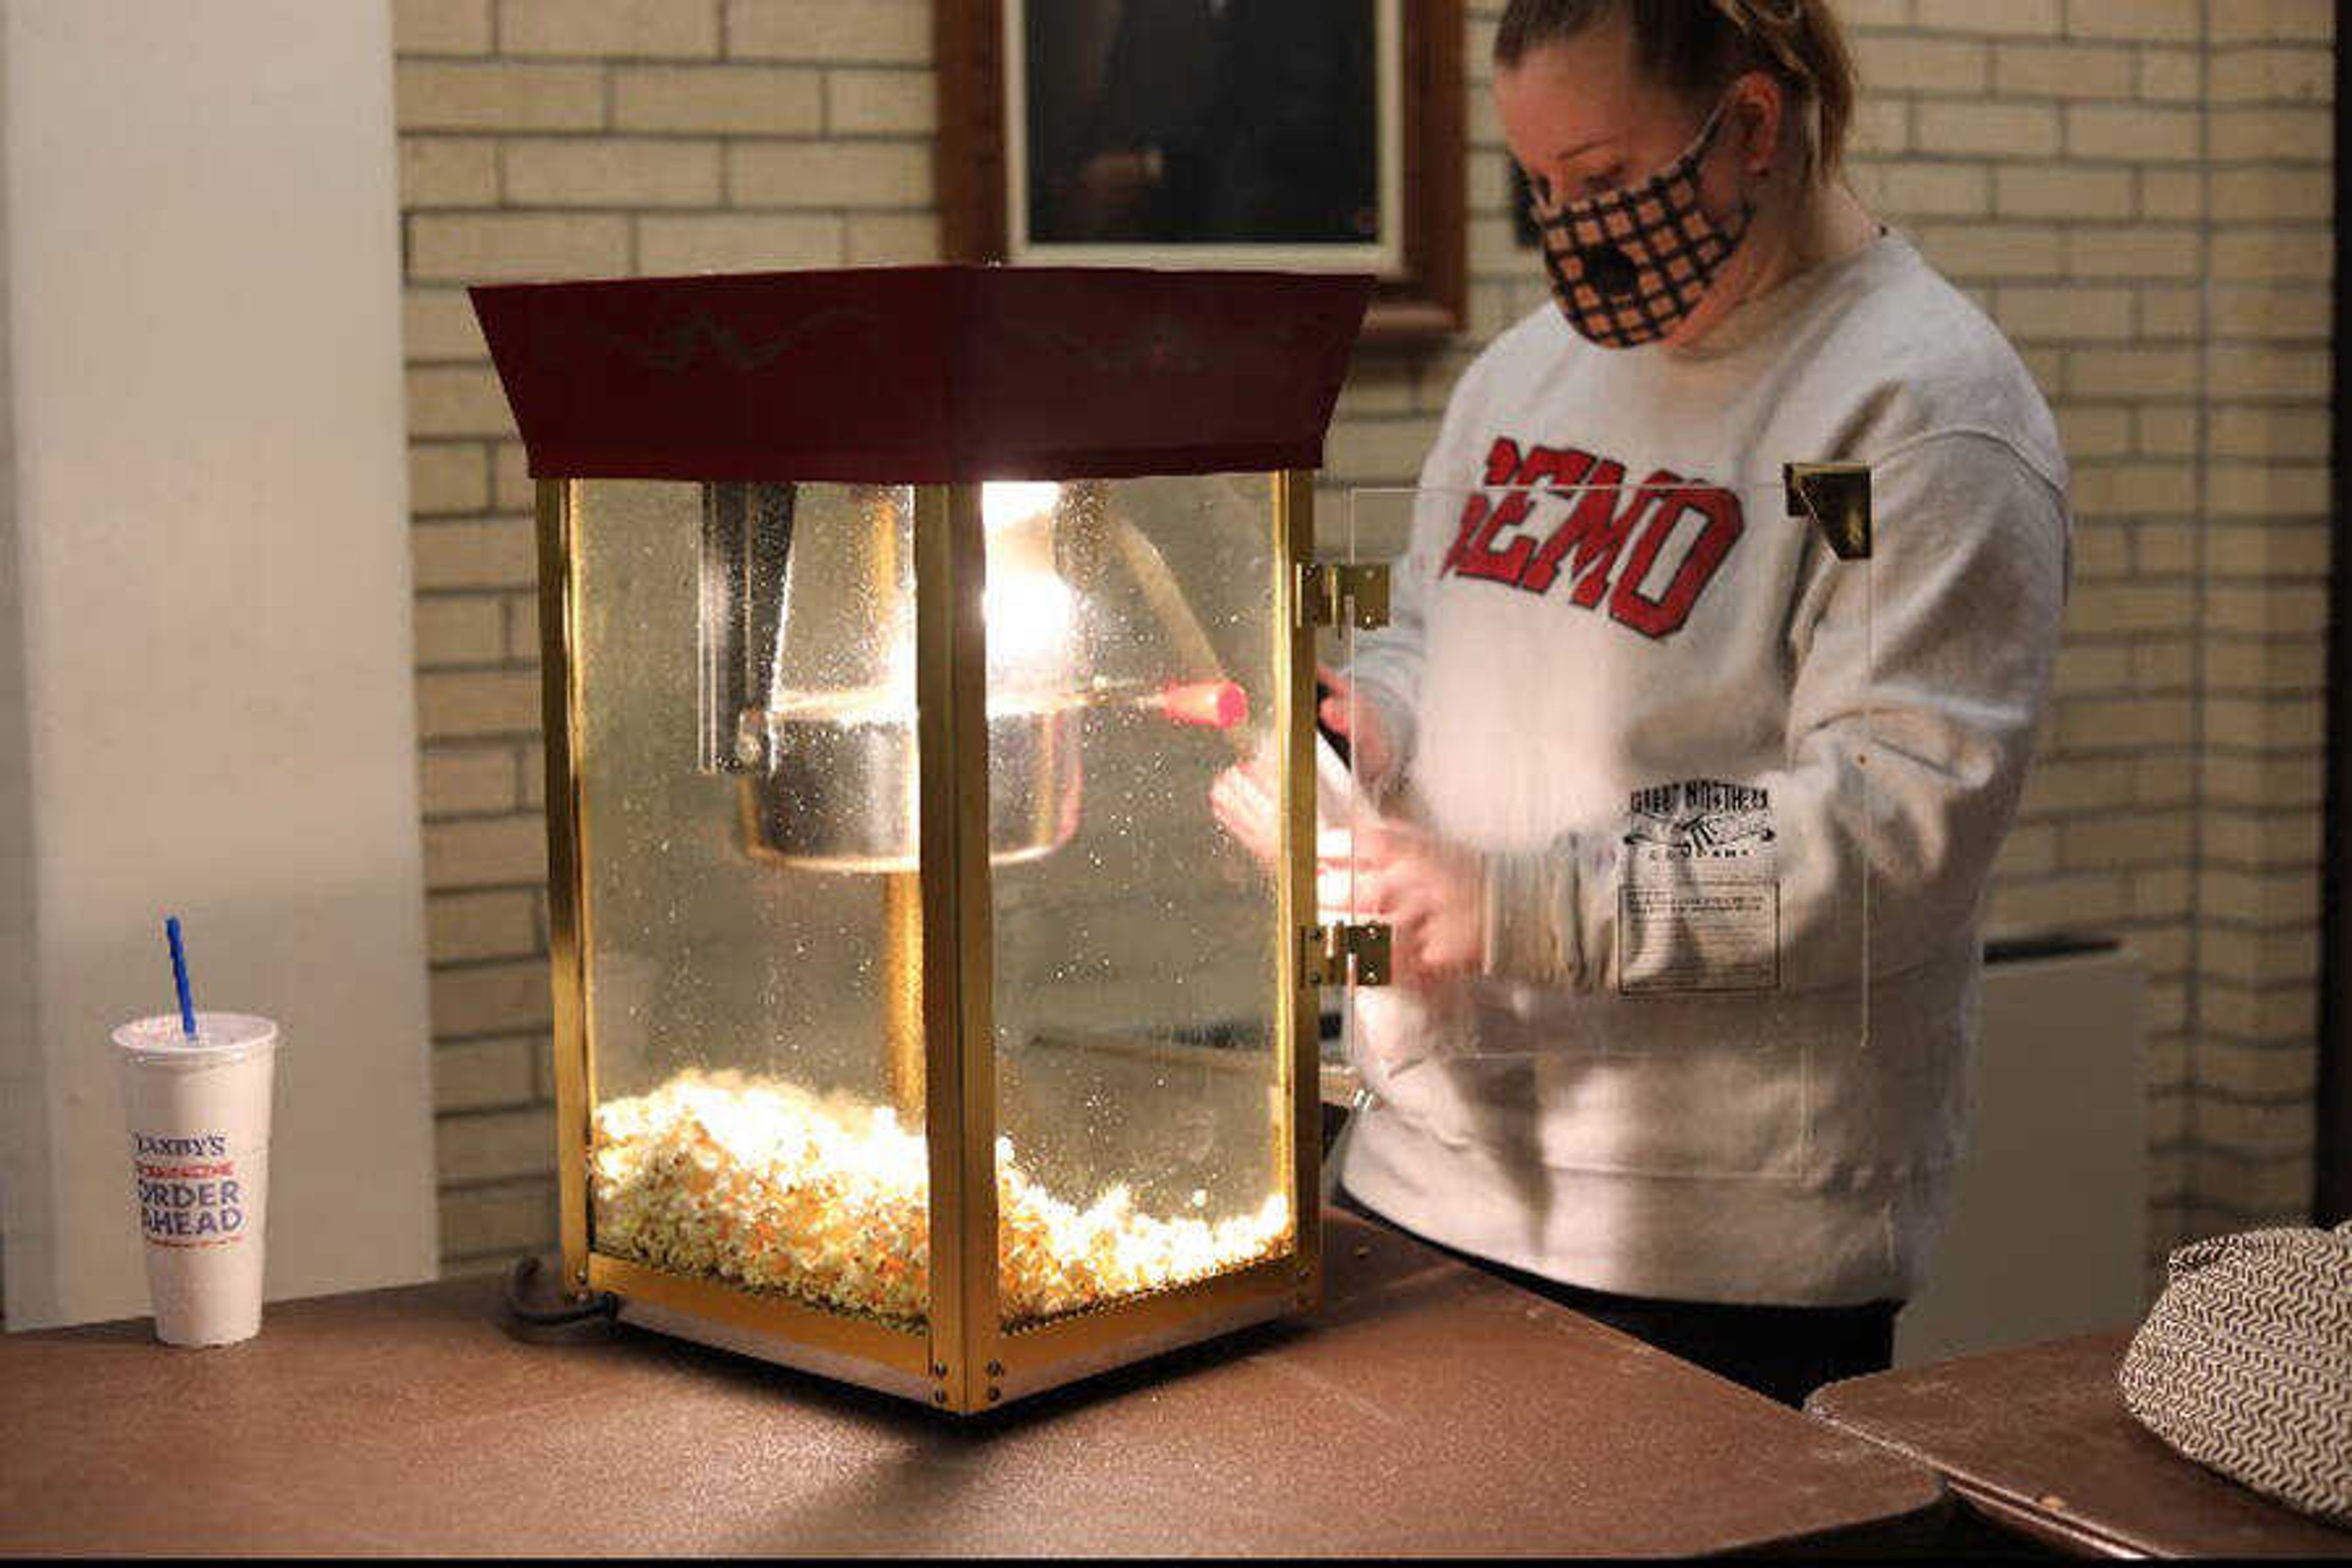 Anna Ockel, Student Activities Counsel president, pops popcorn before the movie “The King of Staten Island” starts on Sat., Jan 30, at Grauel. Inside Rose Theater, the movie starts by showing Pete Davidson’s character, Scott Carlin, driving down the road with his eyes closed.